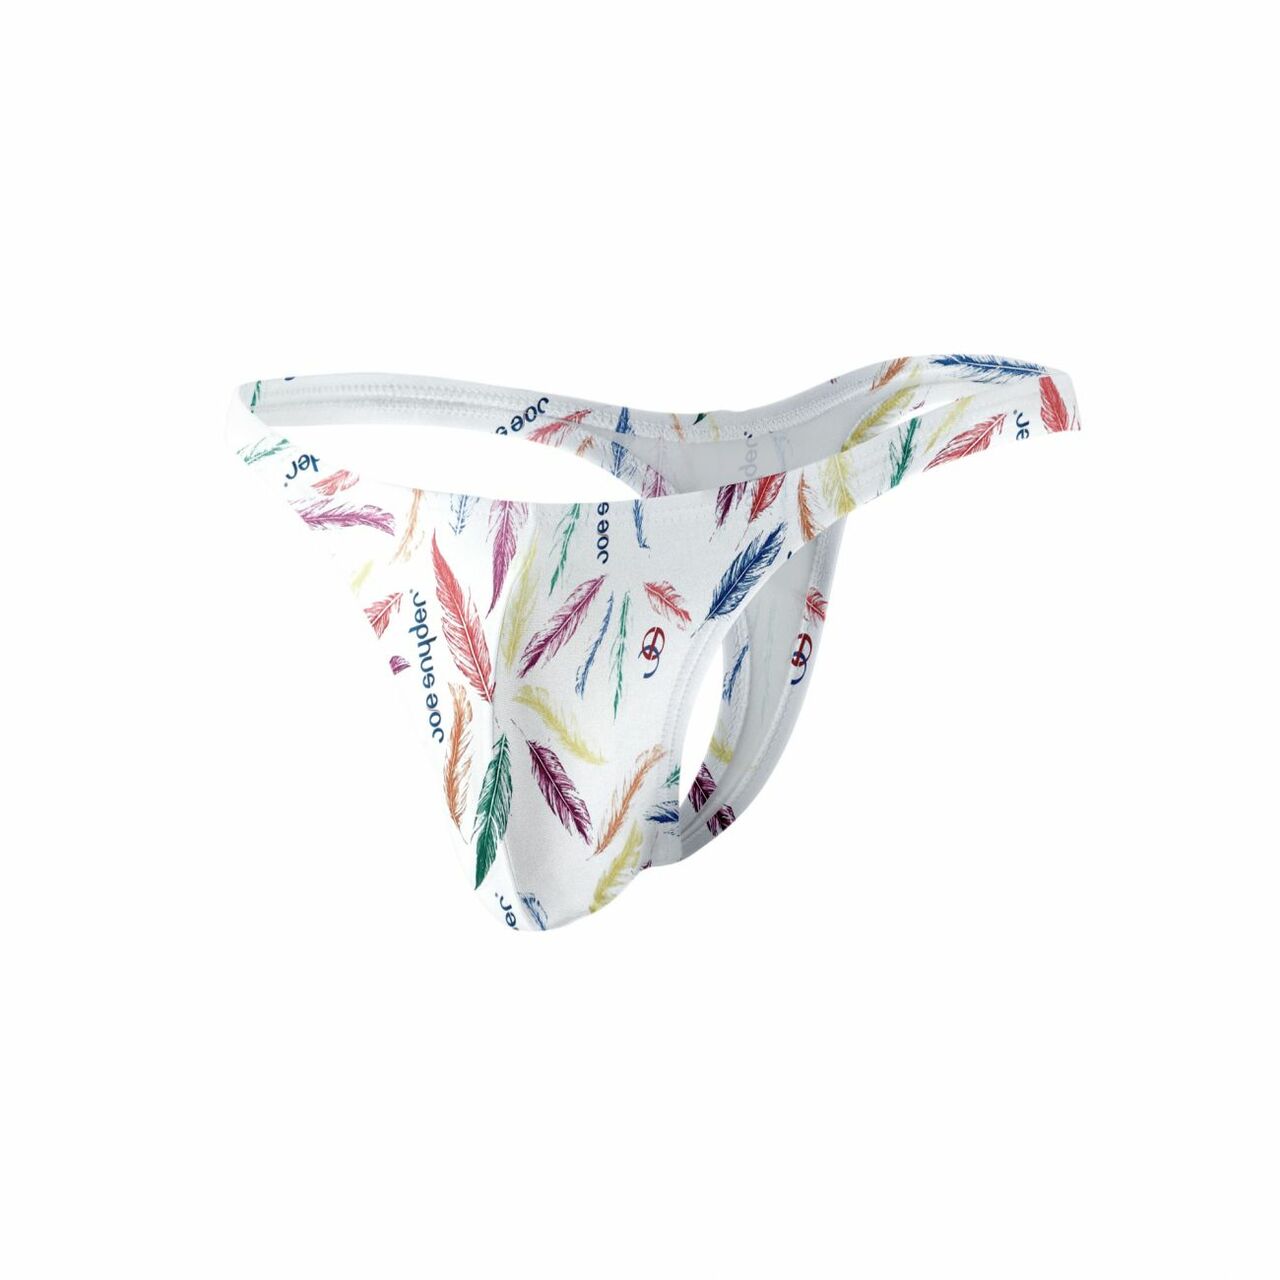 SALE - Joe Snyder Mens Polyester Thong Feathers